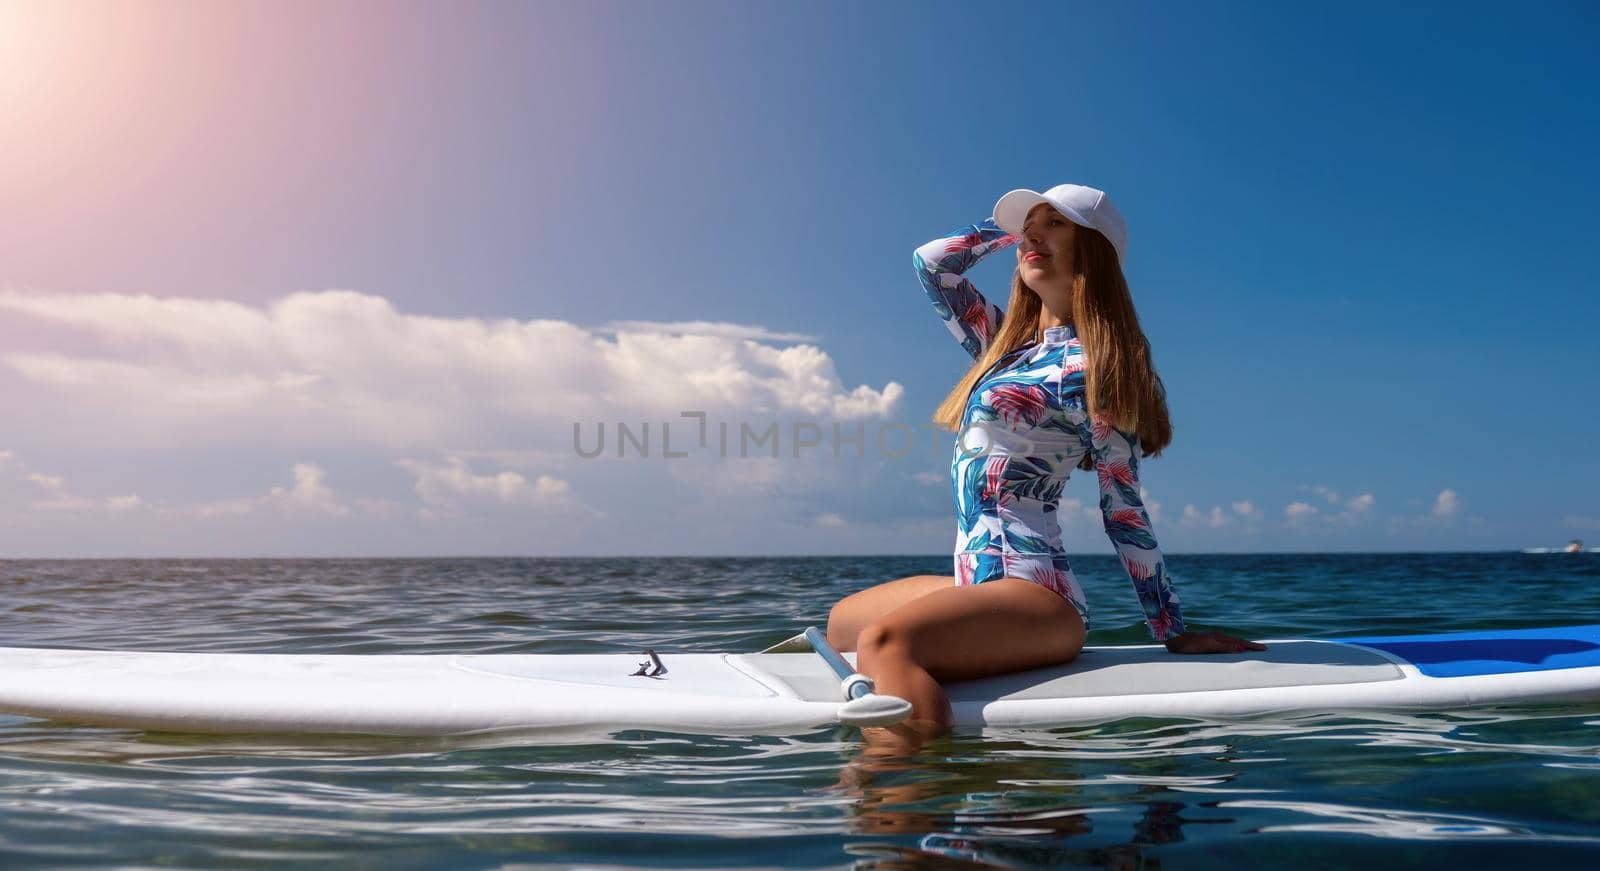 SUP Stand up paddle board. Young woman sailing on beautiful calm sea with crystal clear water. The concept of an summer holidays vacation travel, relax, active and healthy life in harmony with nature